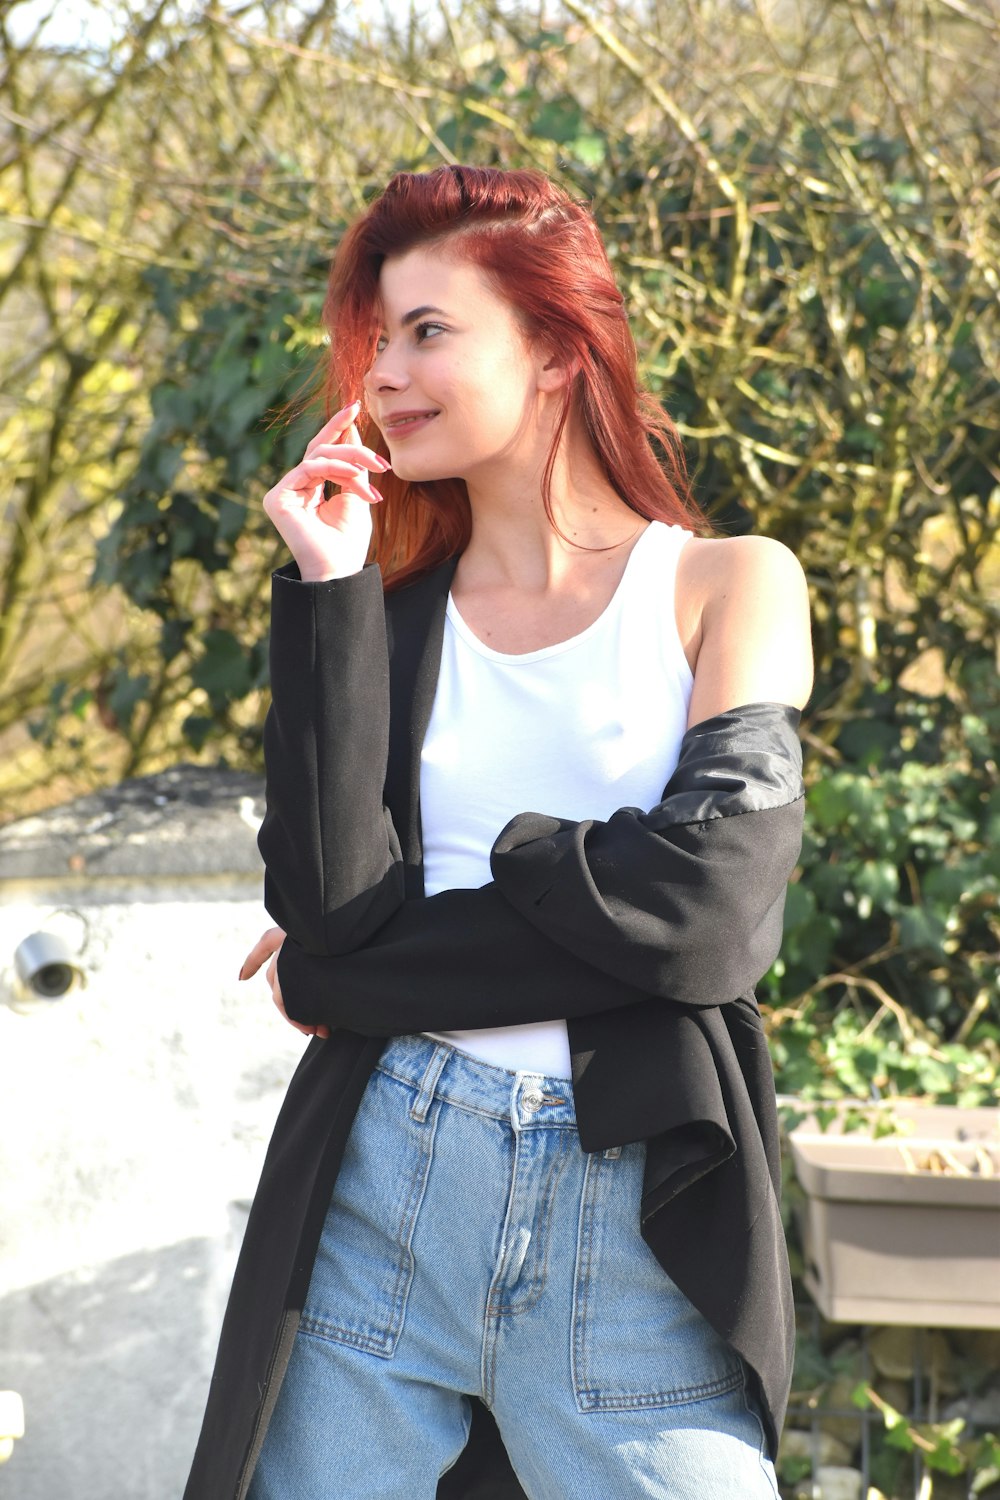 a woman with red hair is talking on a cell phone